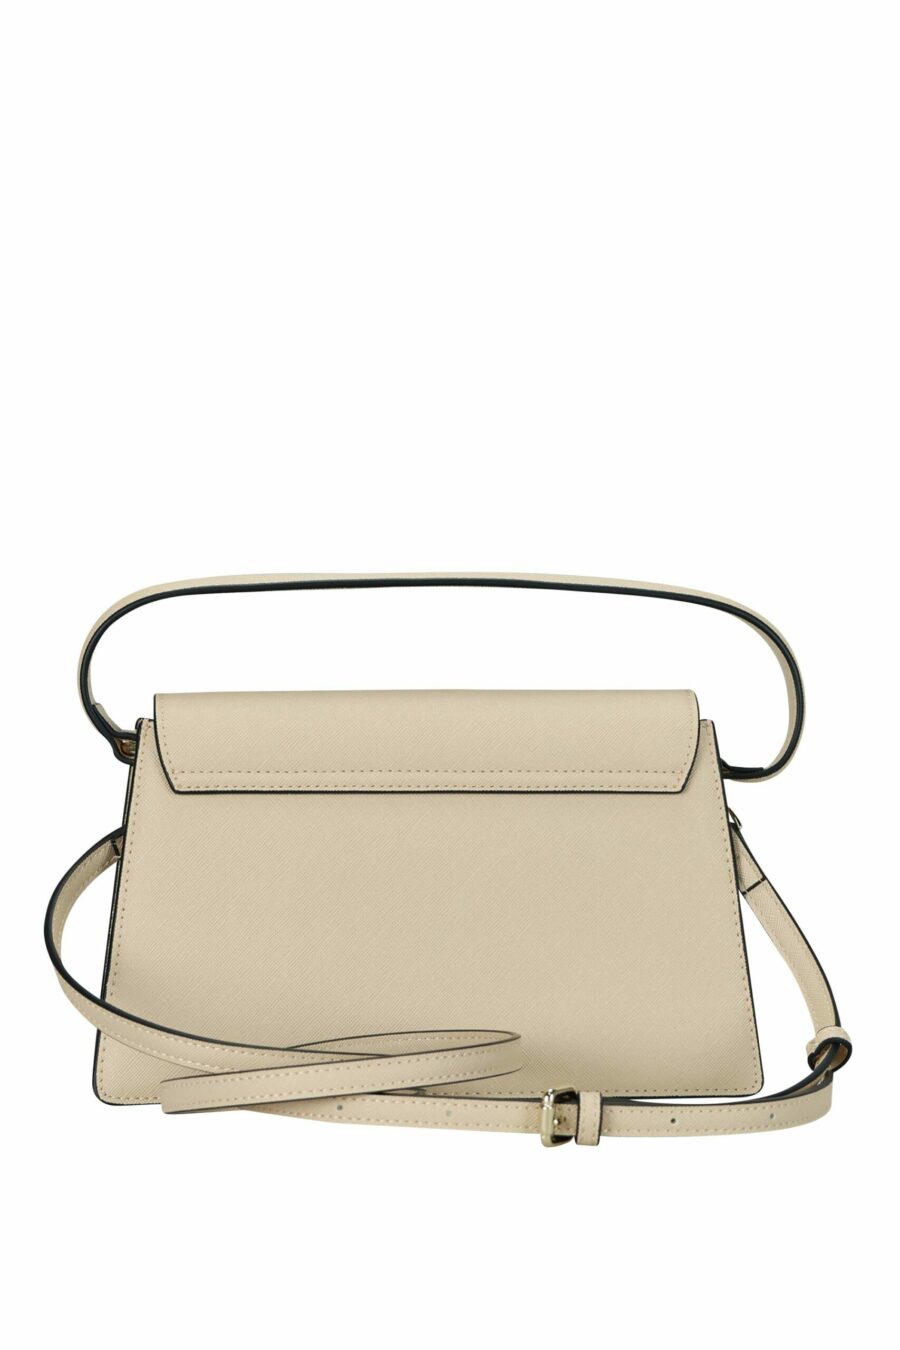 Beige shoulder bag with flap with silver lettering maxilogo - 8052672641670 2 scaled